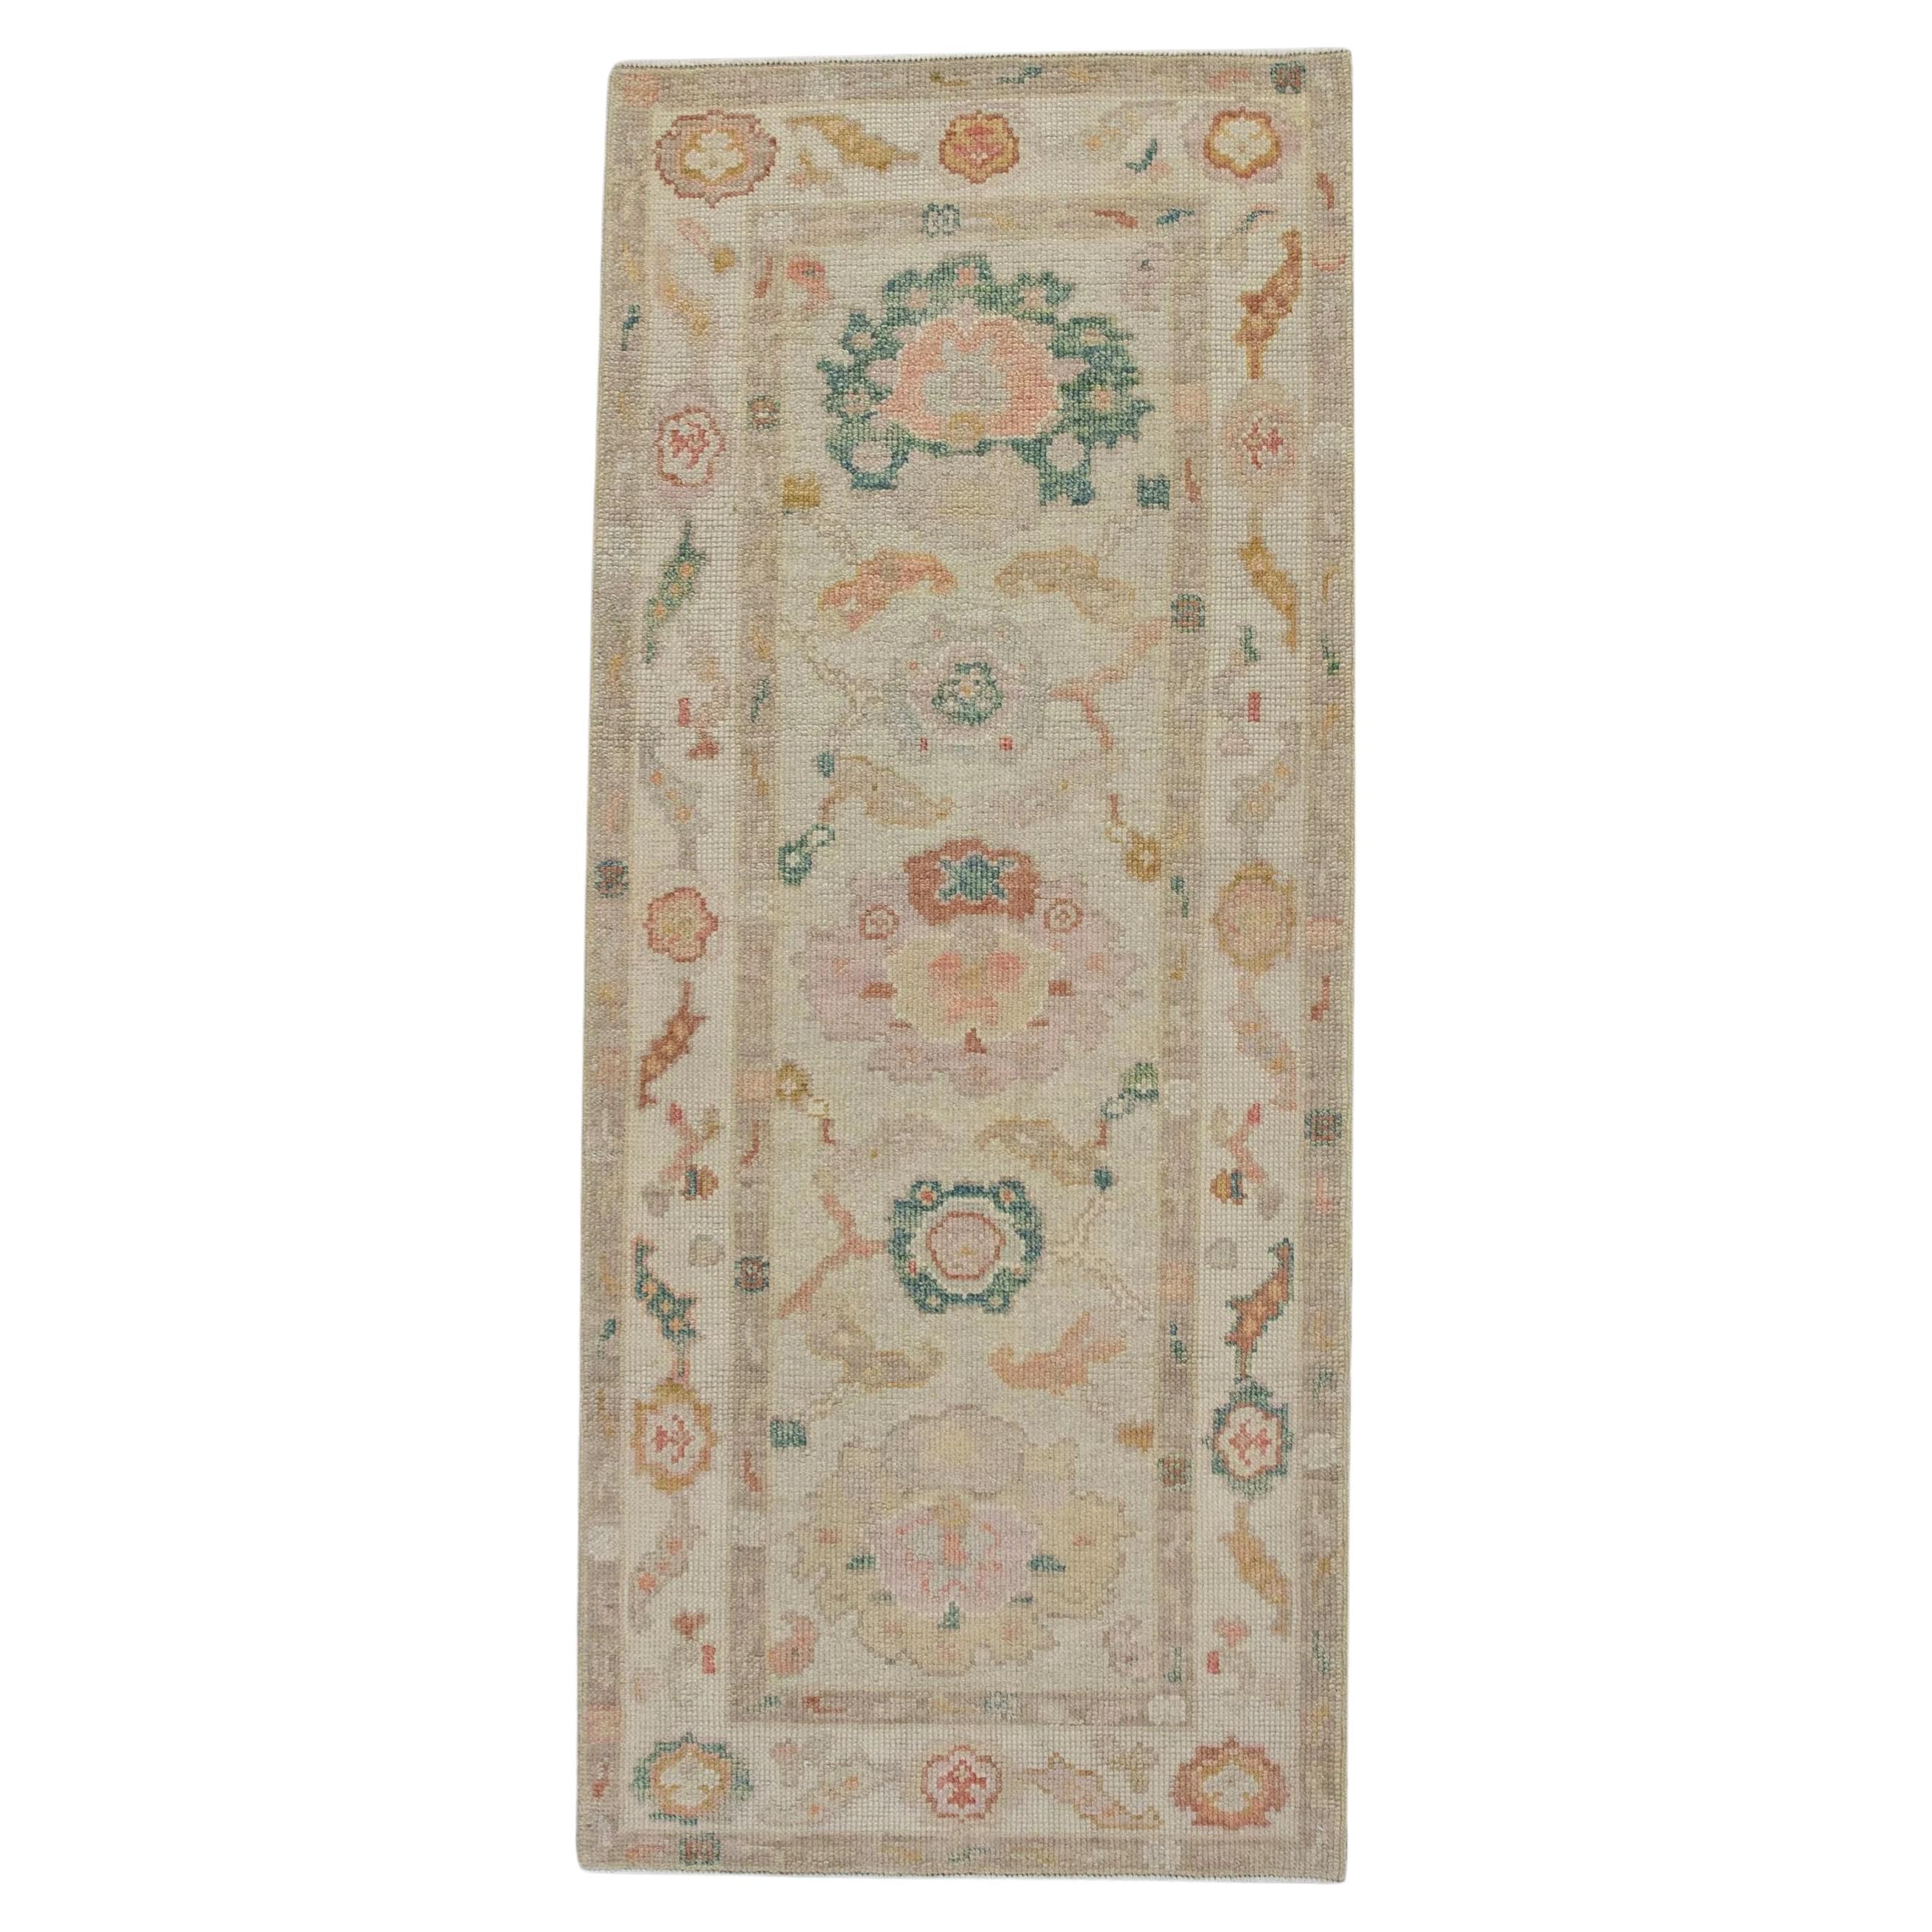 Multicolor Floral Handwoven Wool Turkish Oushak Rug 2'7" x 6' For Sale